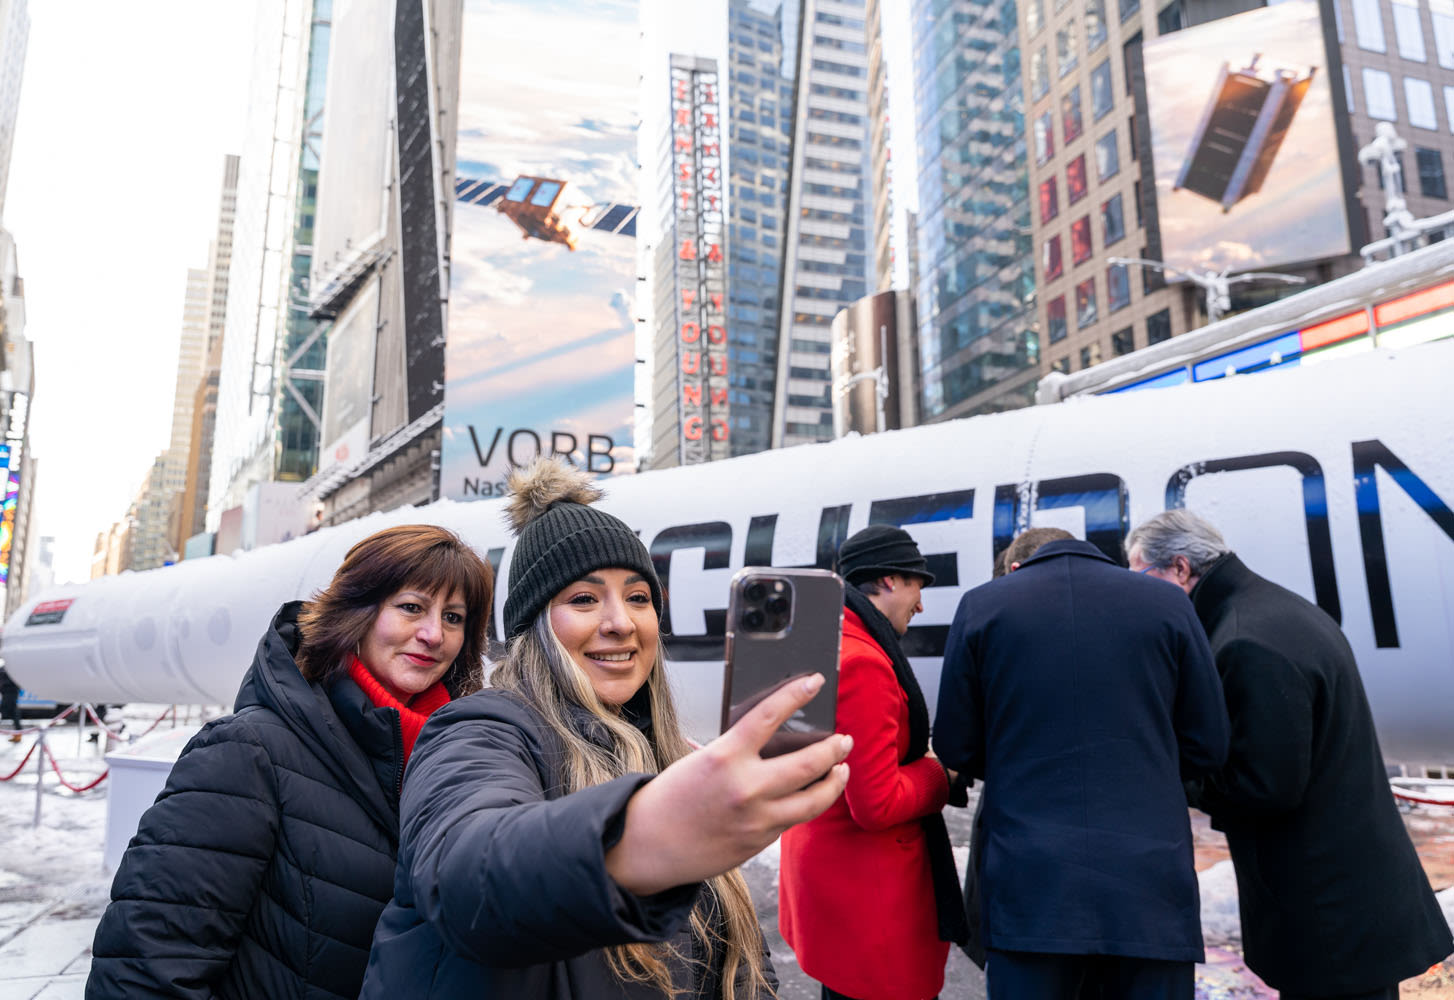 Two members of the public take a selfie in front of LauncherOne rocket in Times Square